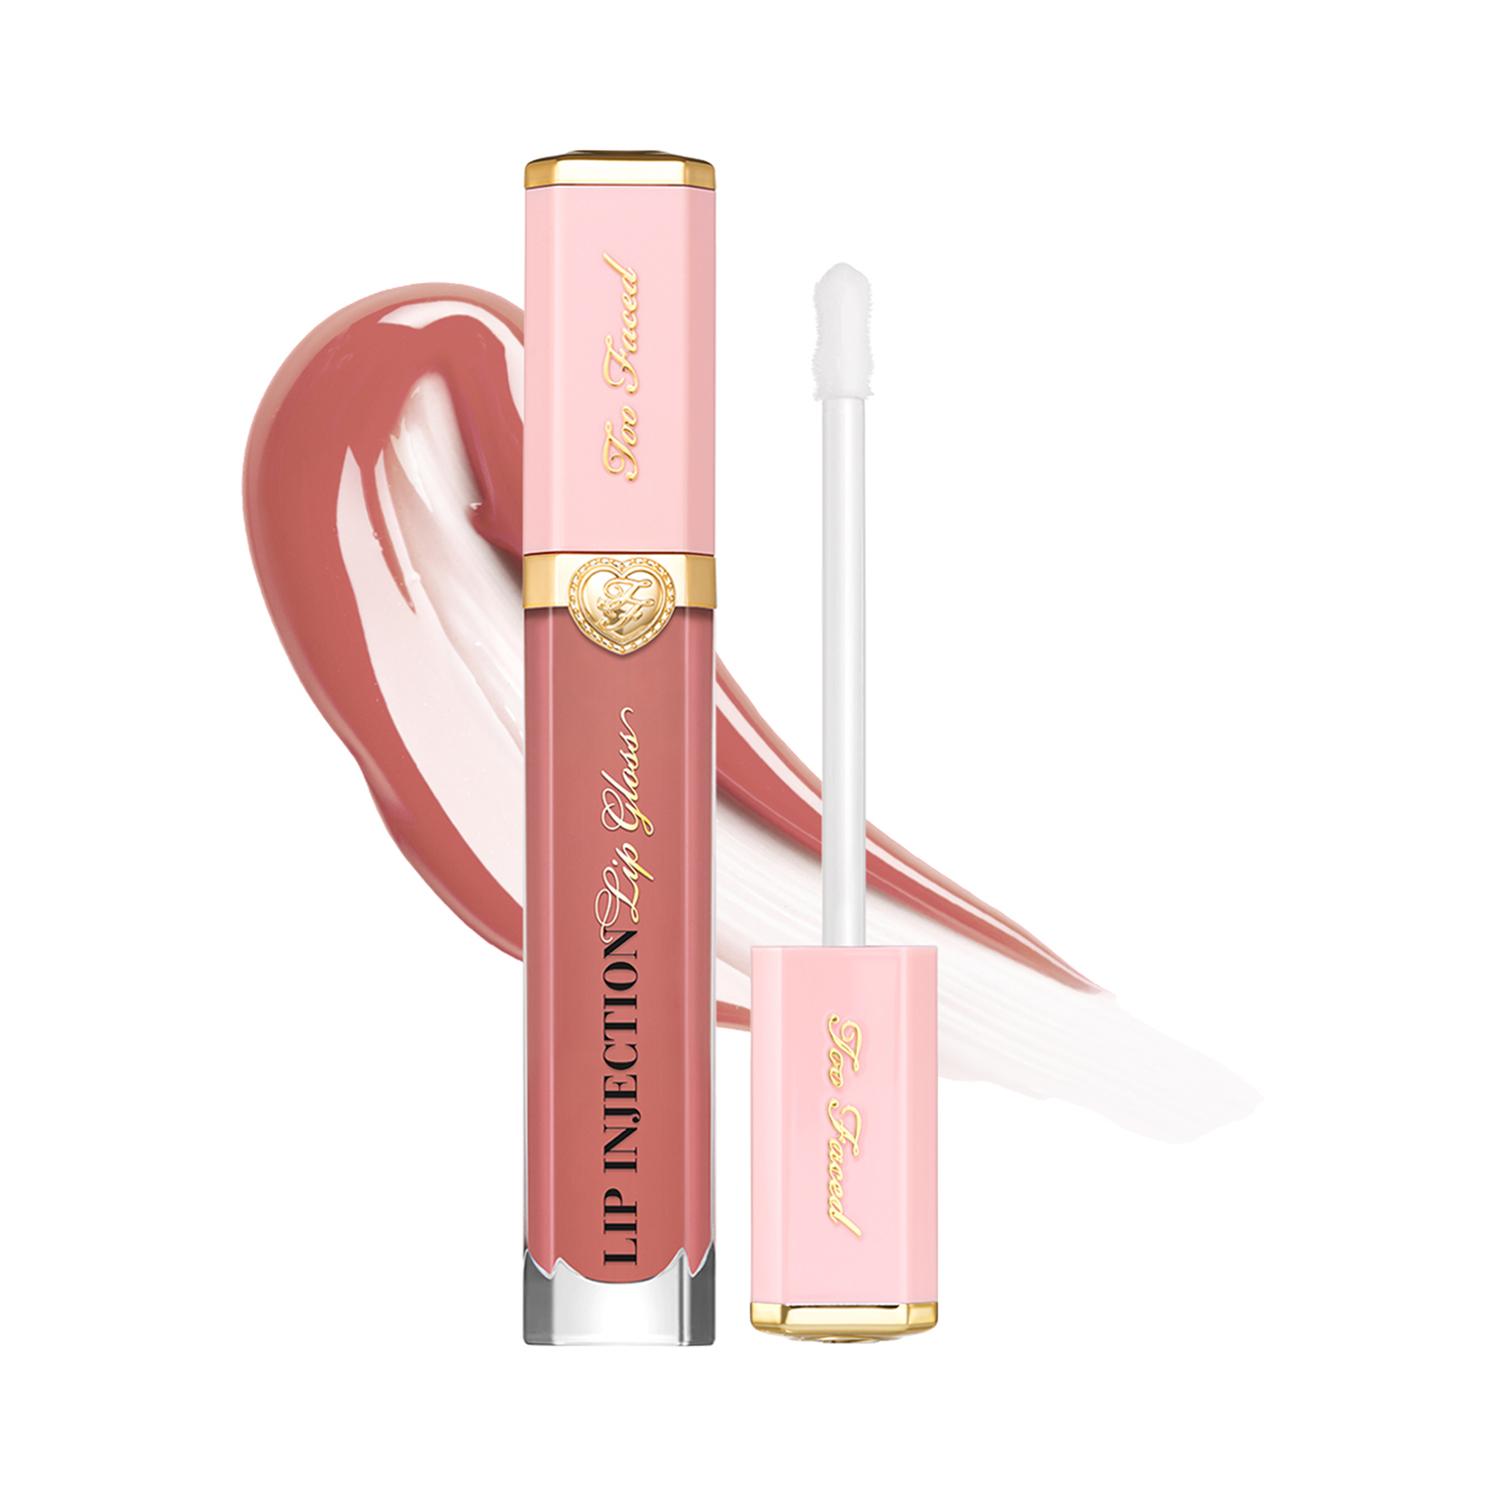 Too Faced | Too Faced Lip Injection Power Plumping Lip Gloss -Wifey for Lifey (7ml)